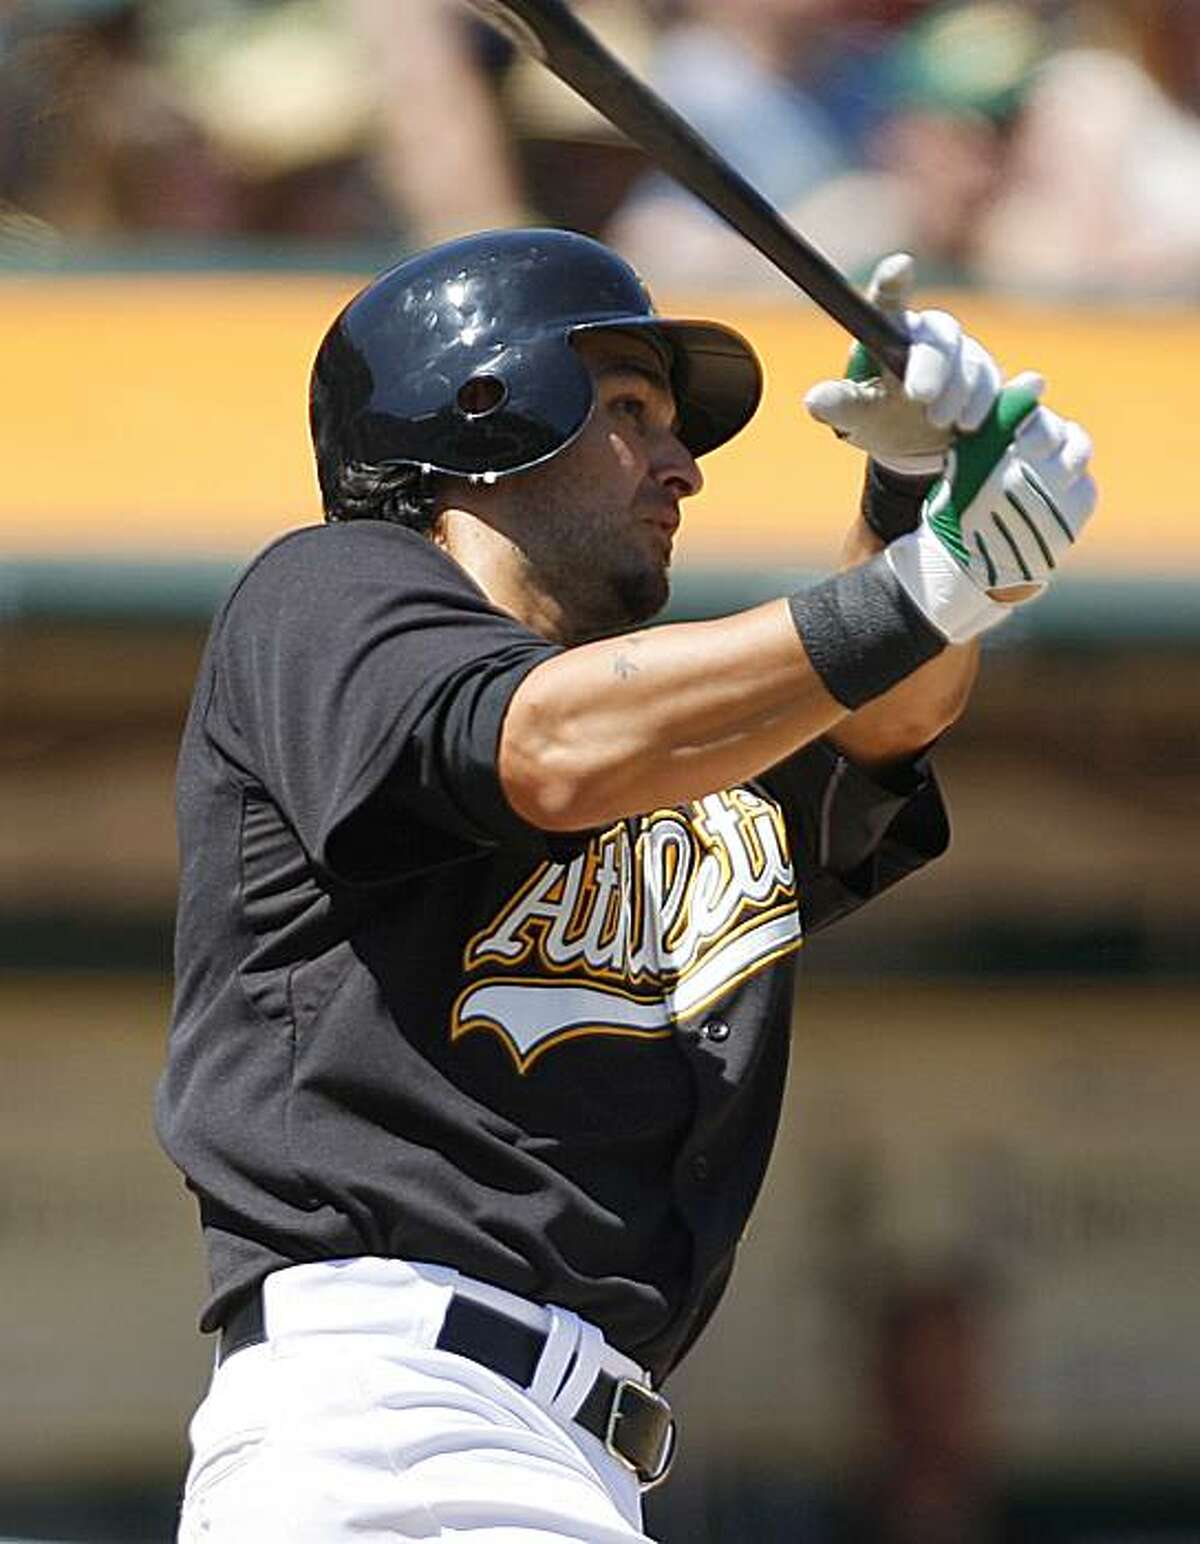 Oakland Athletics' Eric Chavez connects for an RBI off Cleveland Indians' Justin Masterson during the third inning of a baseball game Sunday, April 25, 2010, in Oakland, Calif.